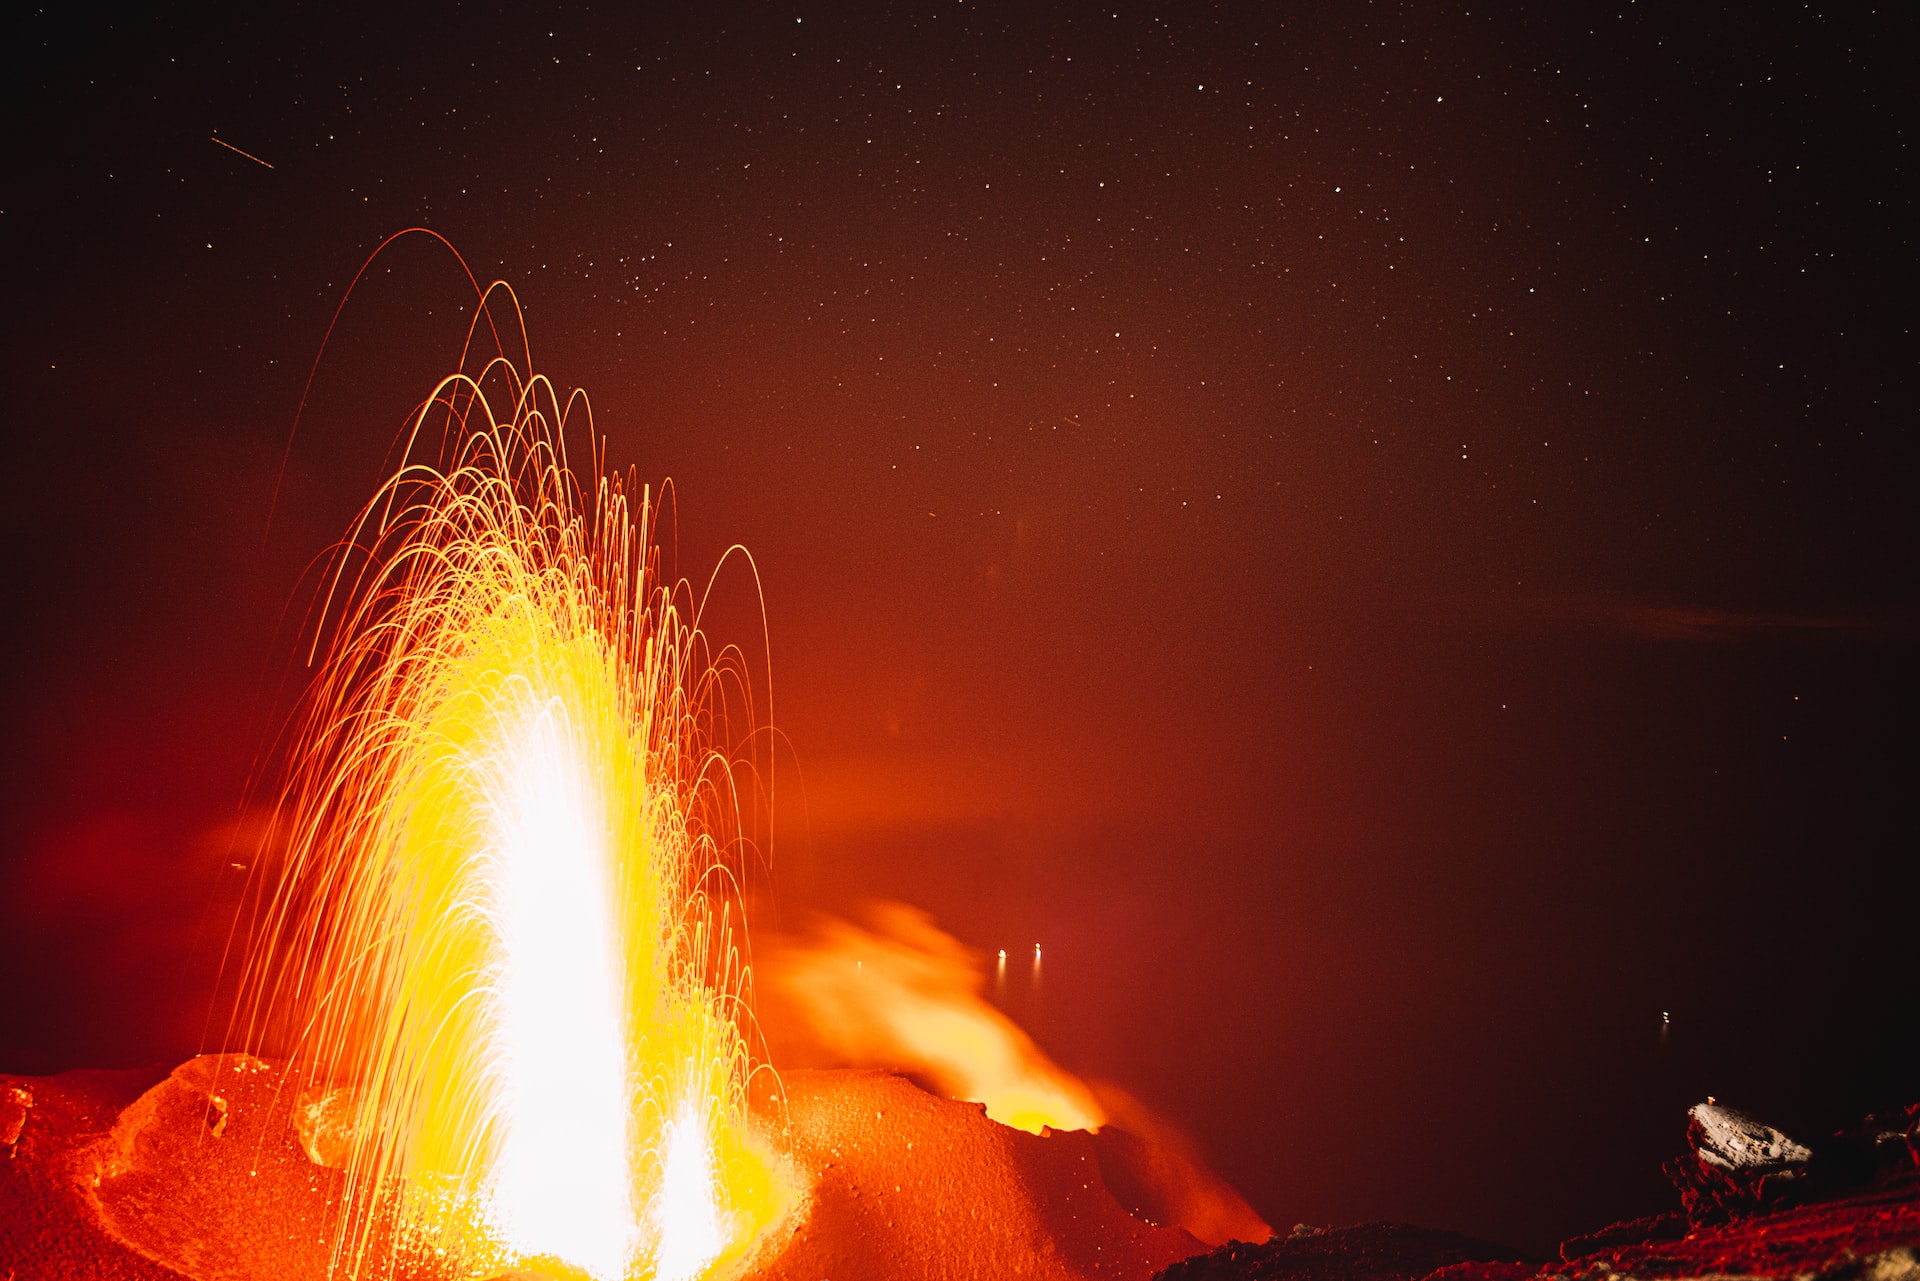 Discover the volcano risk in Italy and get the facts you need to know before you travel there. We answer your questions and reveal the implications for tourists